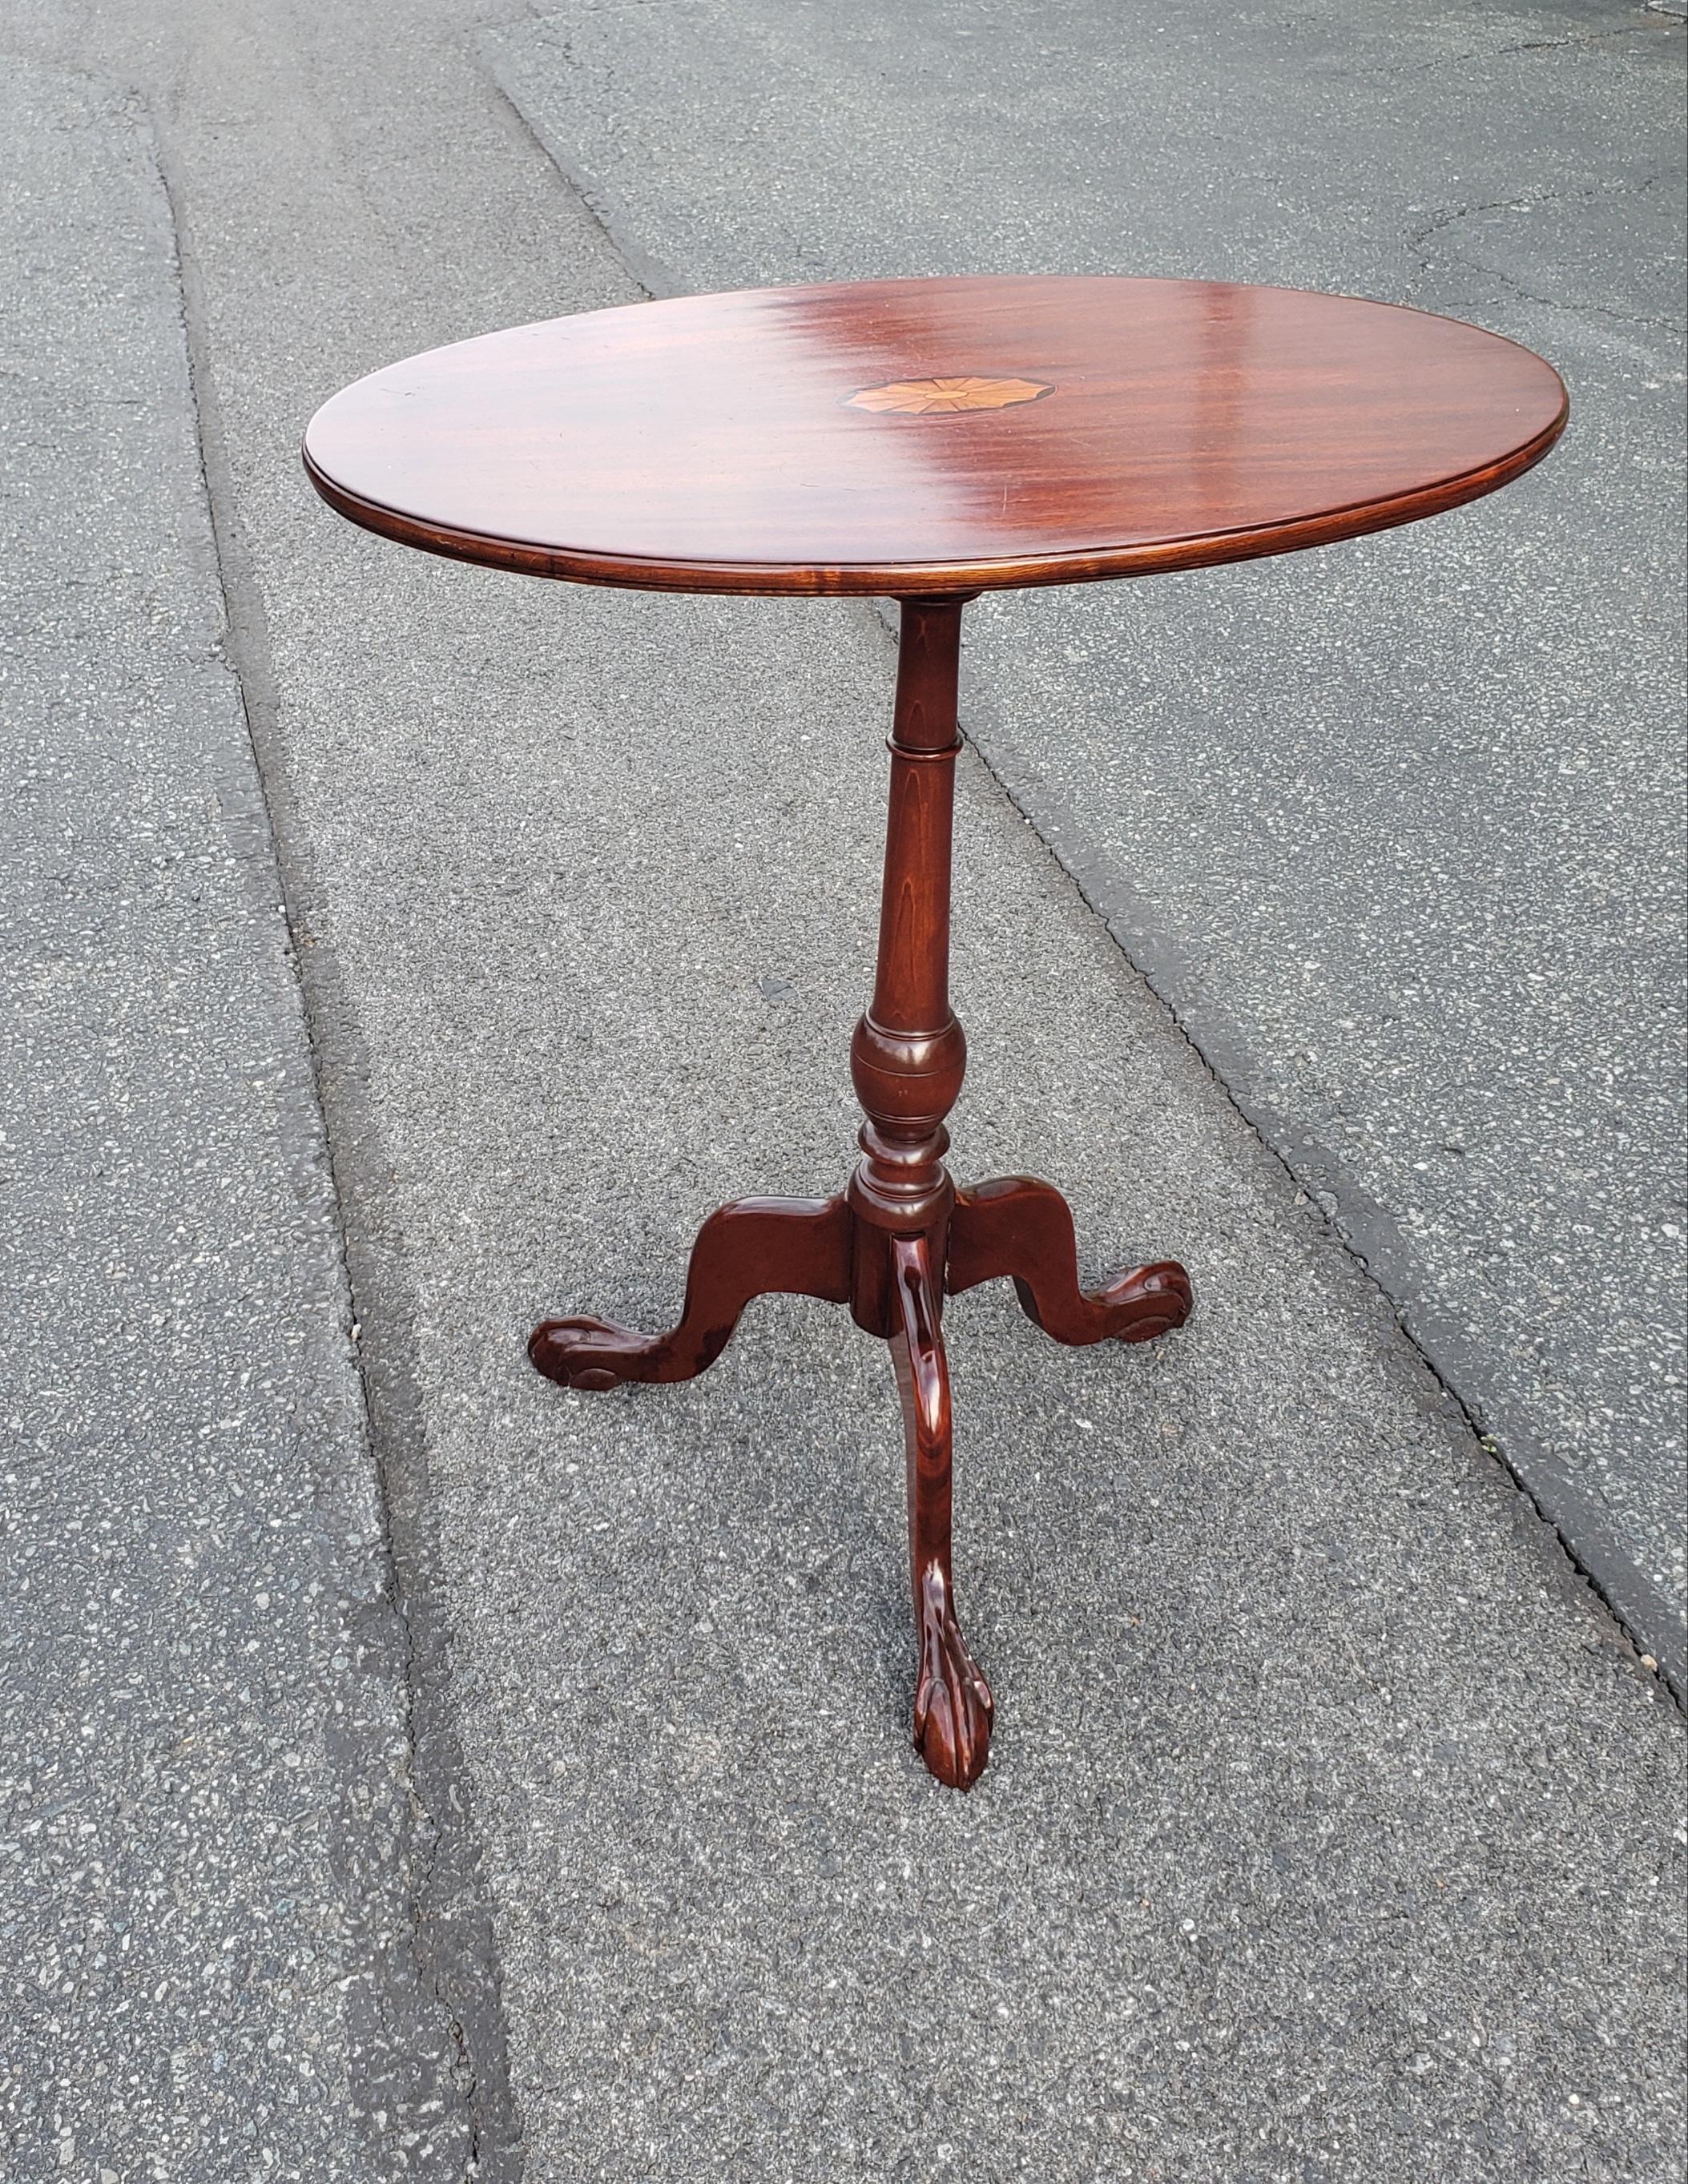 Inlay Mahogany Inlaid Tilt-Top Tea Table Side Table with Tripod ClawFeet For Sale